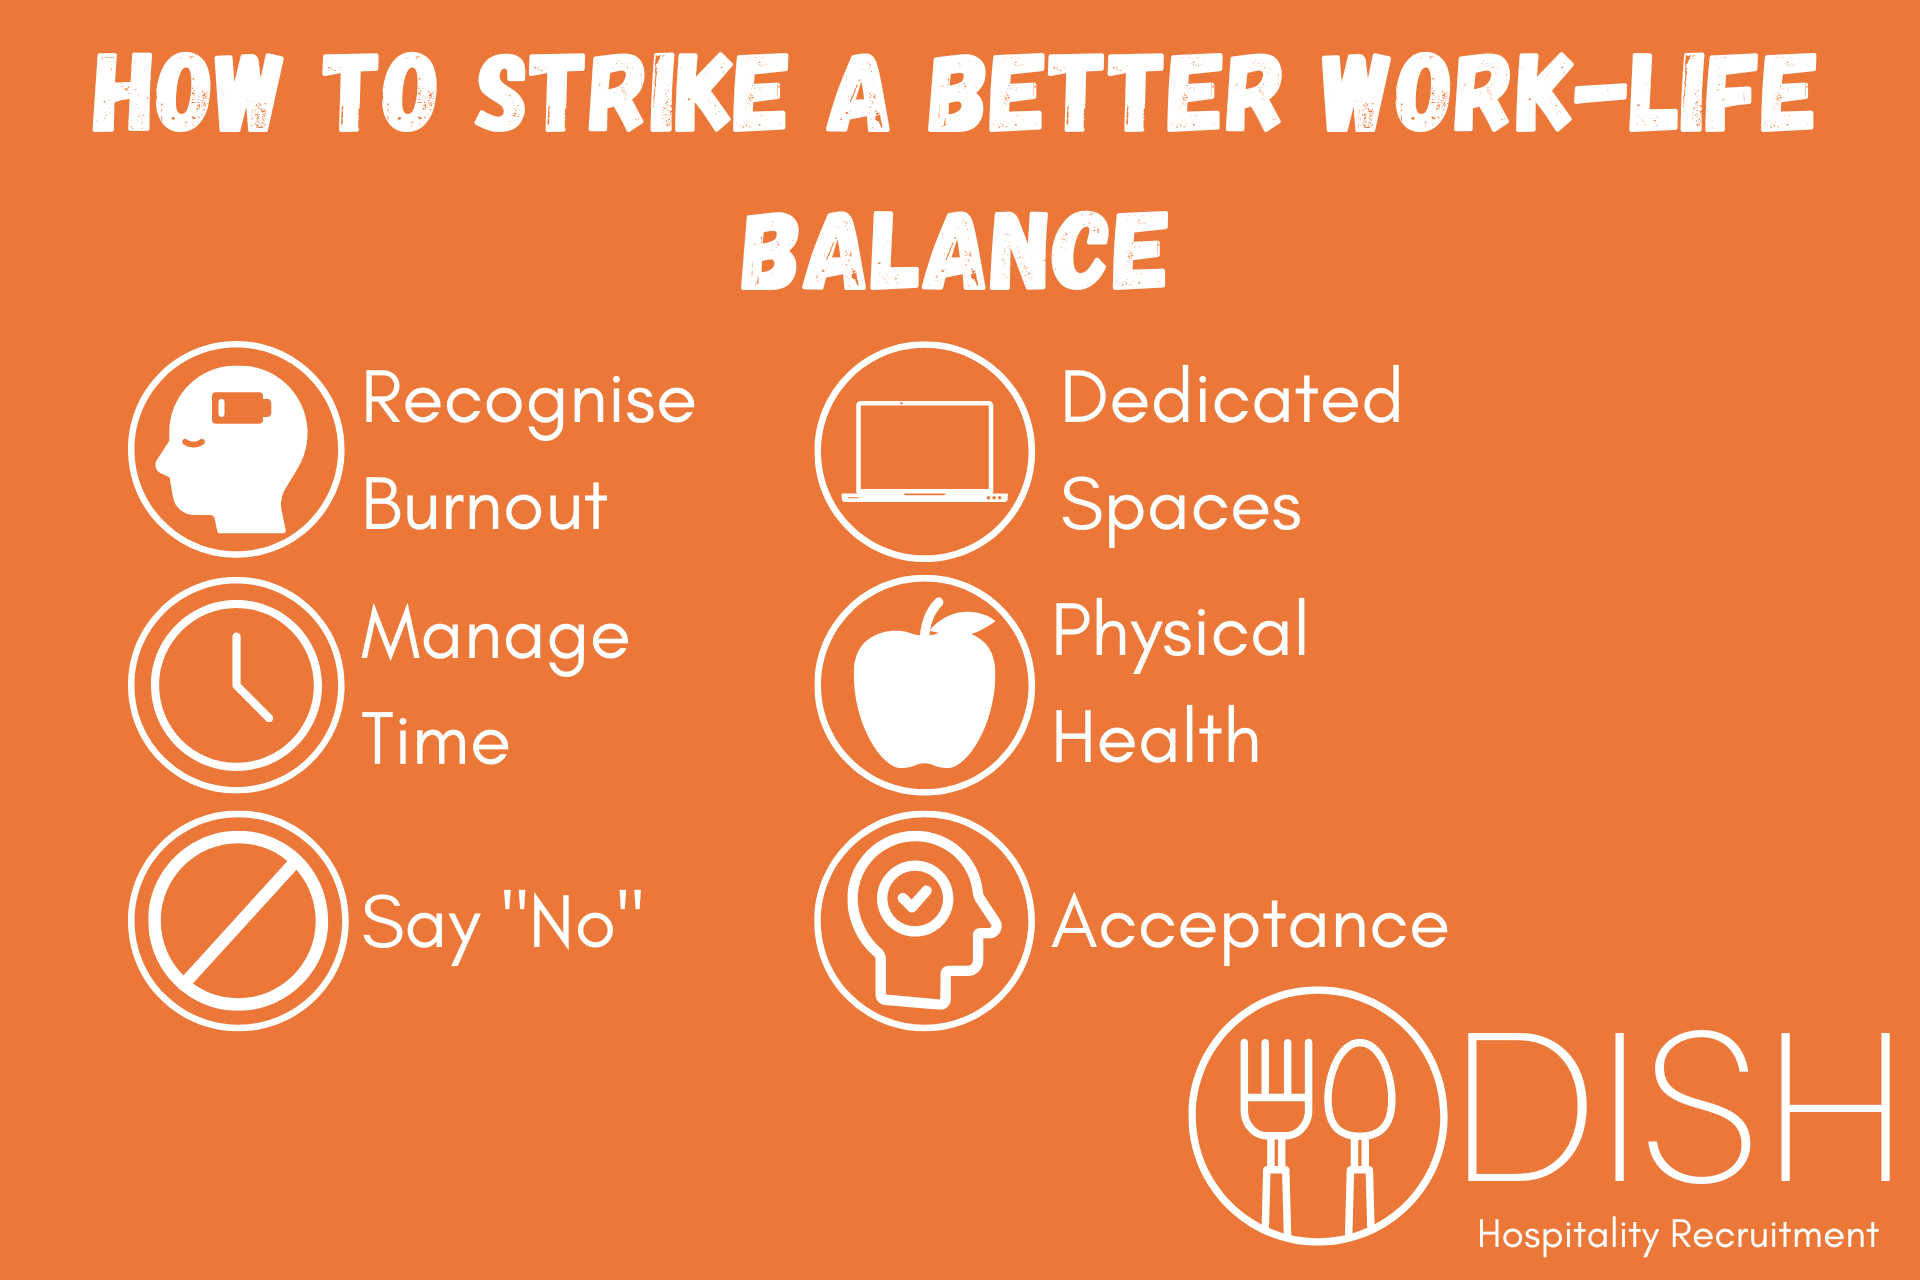 How to Strike a Better Work-Life Balance